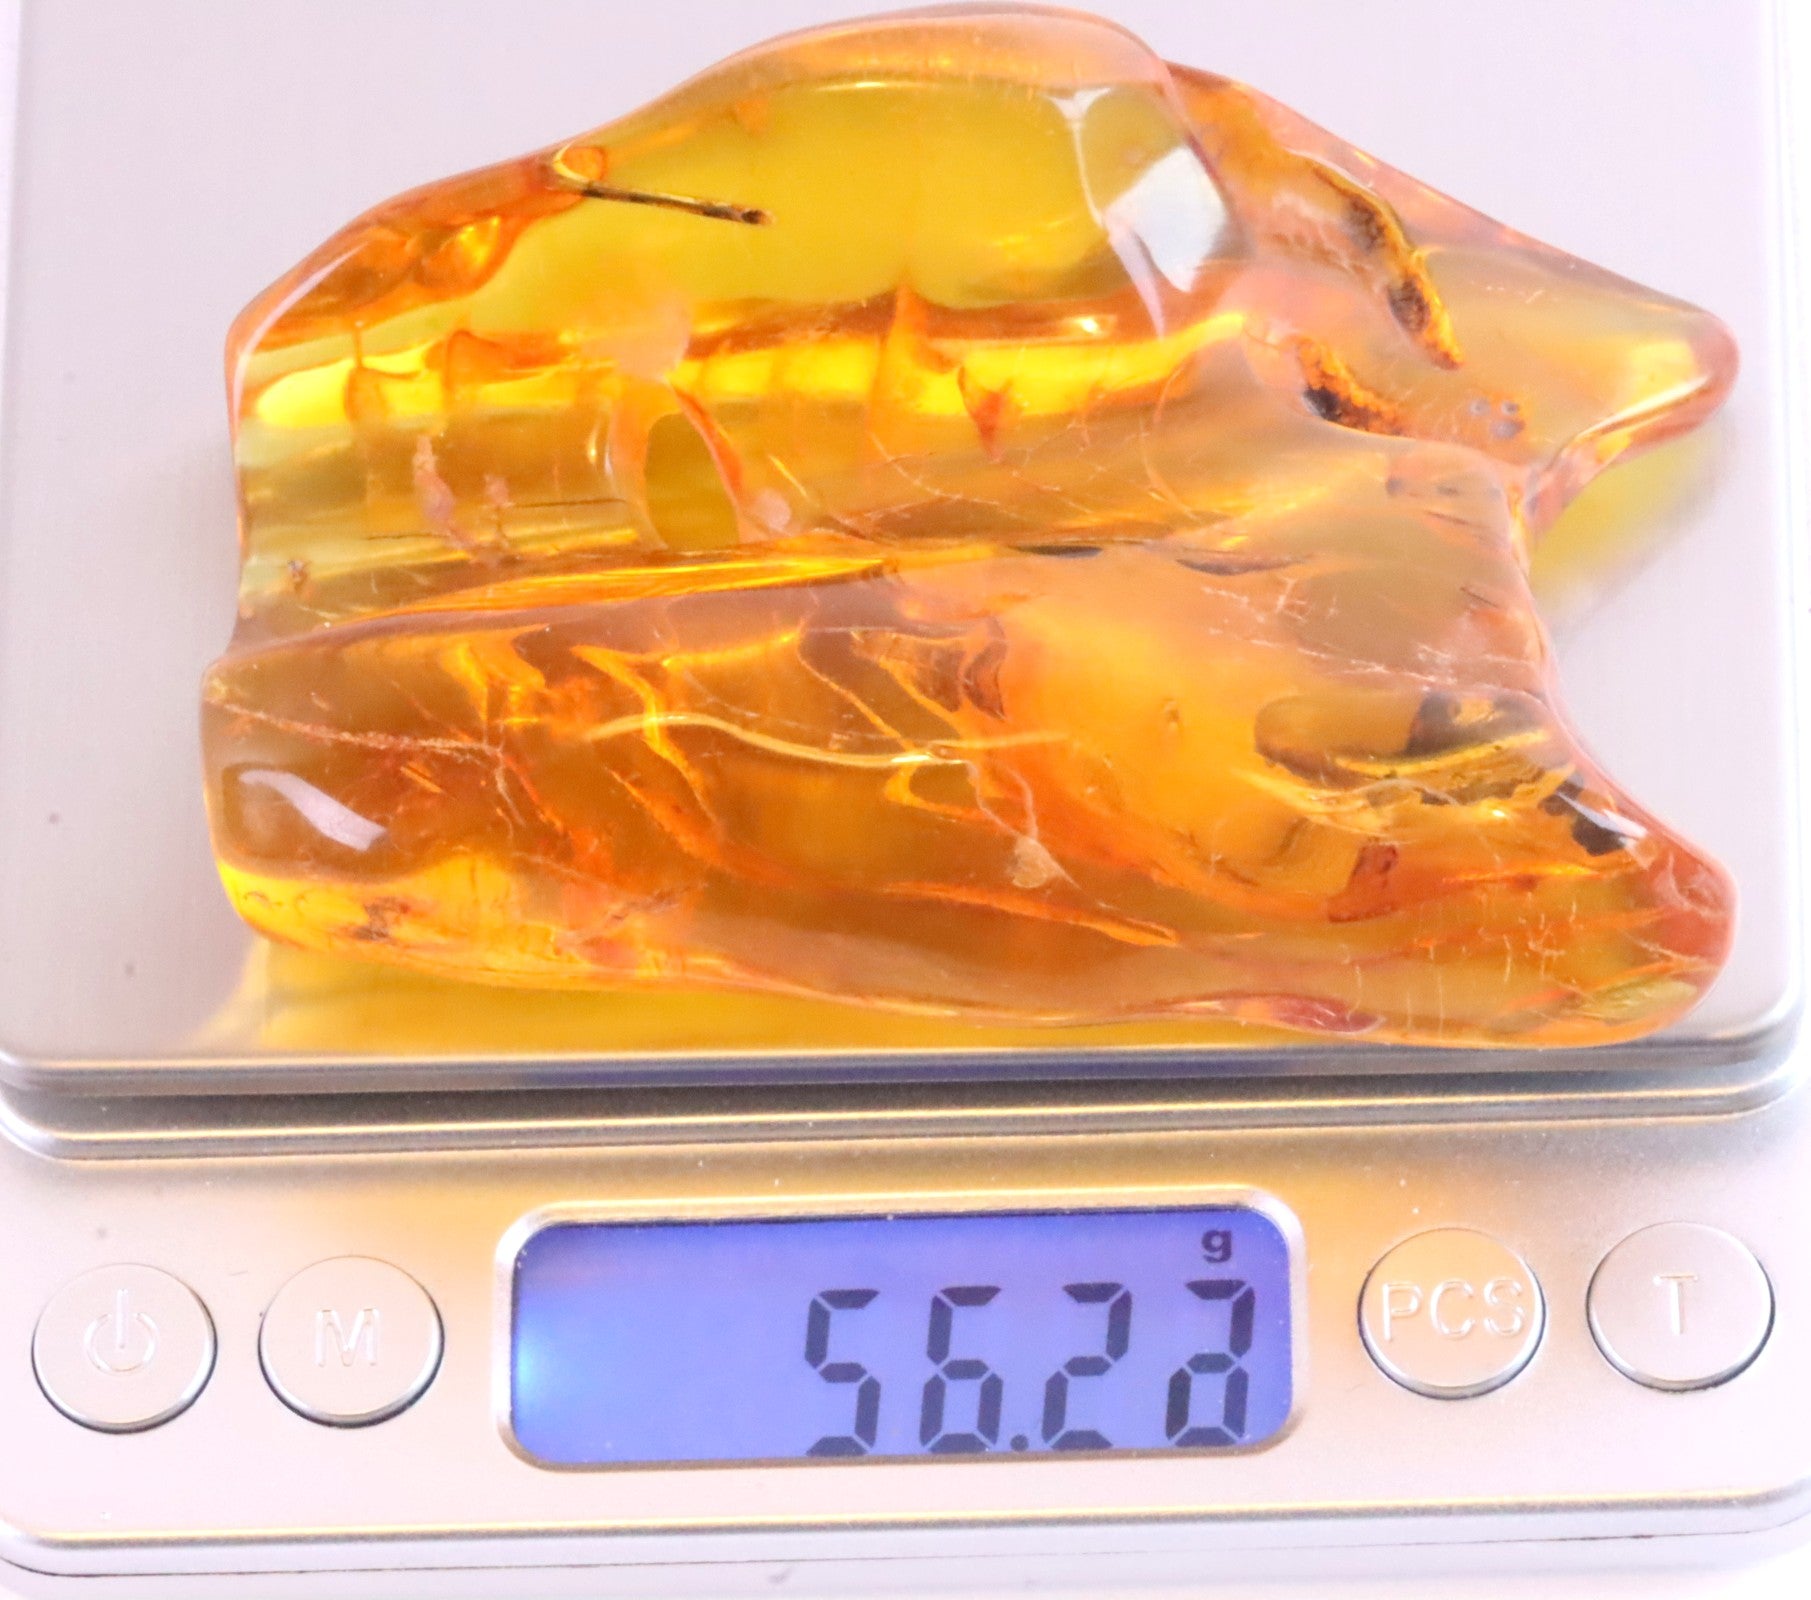 Clear 40 Million year Old Baltic Amber Museum Collector's gem with Insect Inclusion